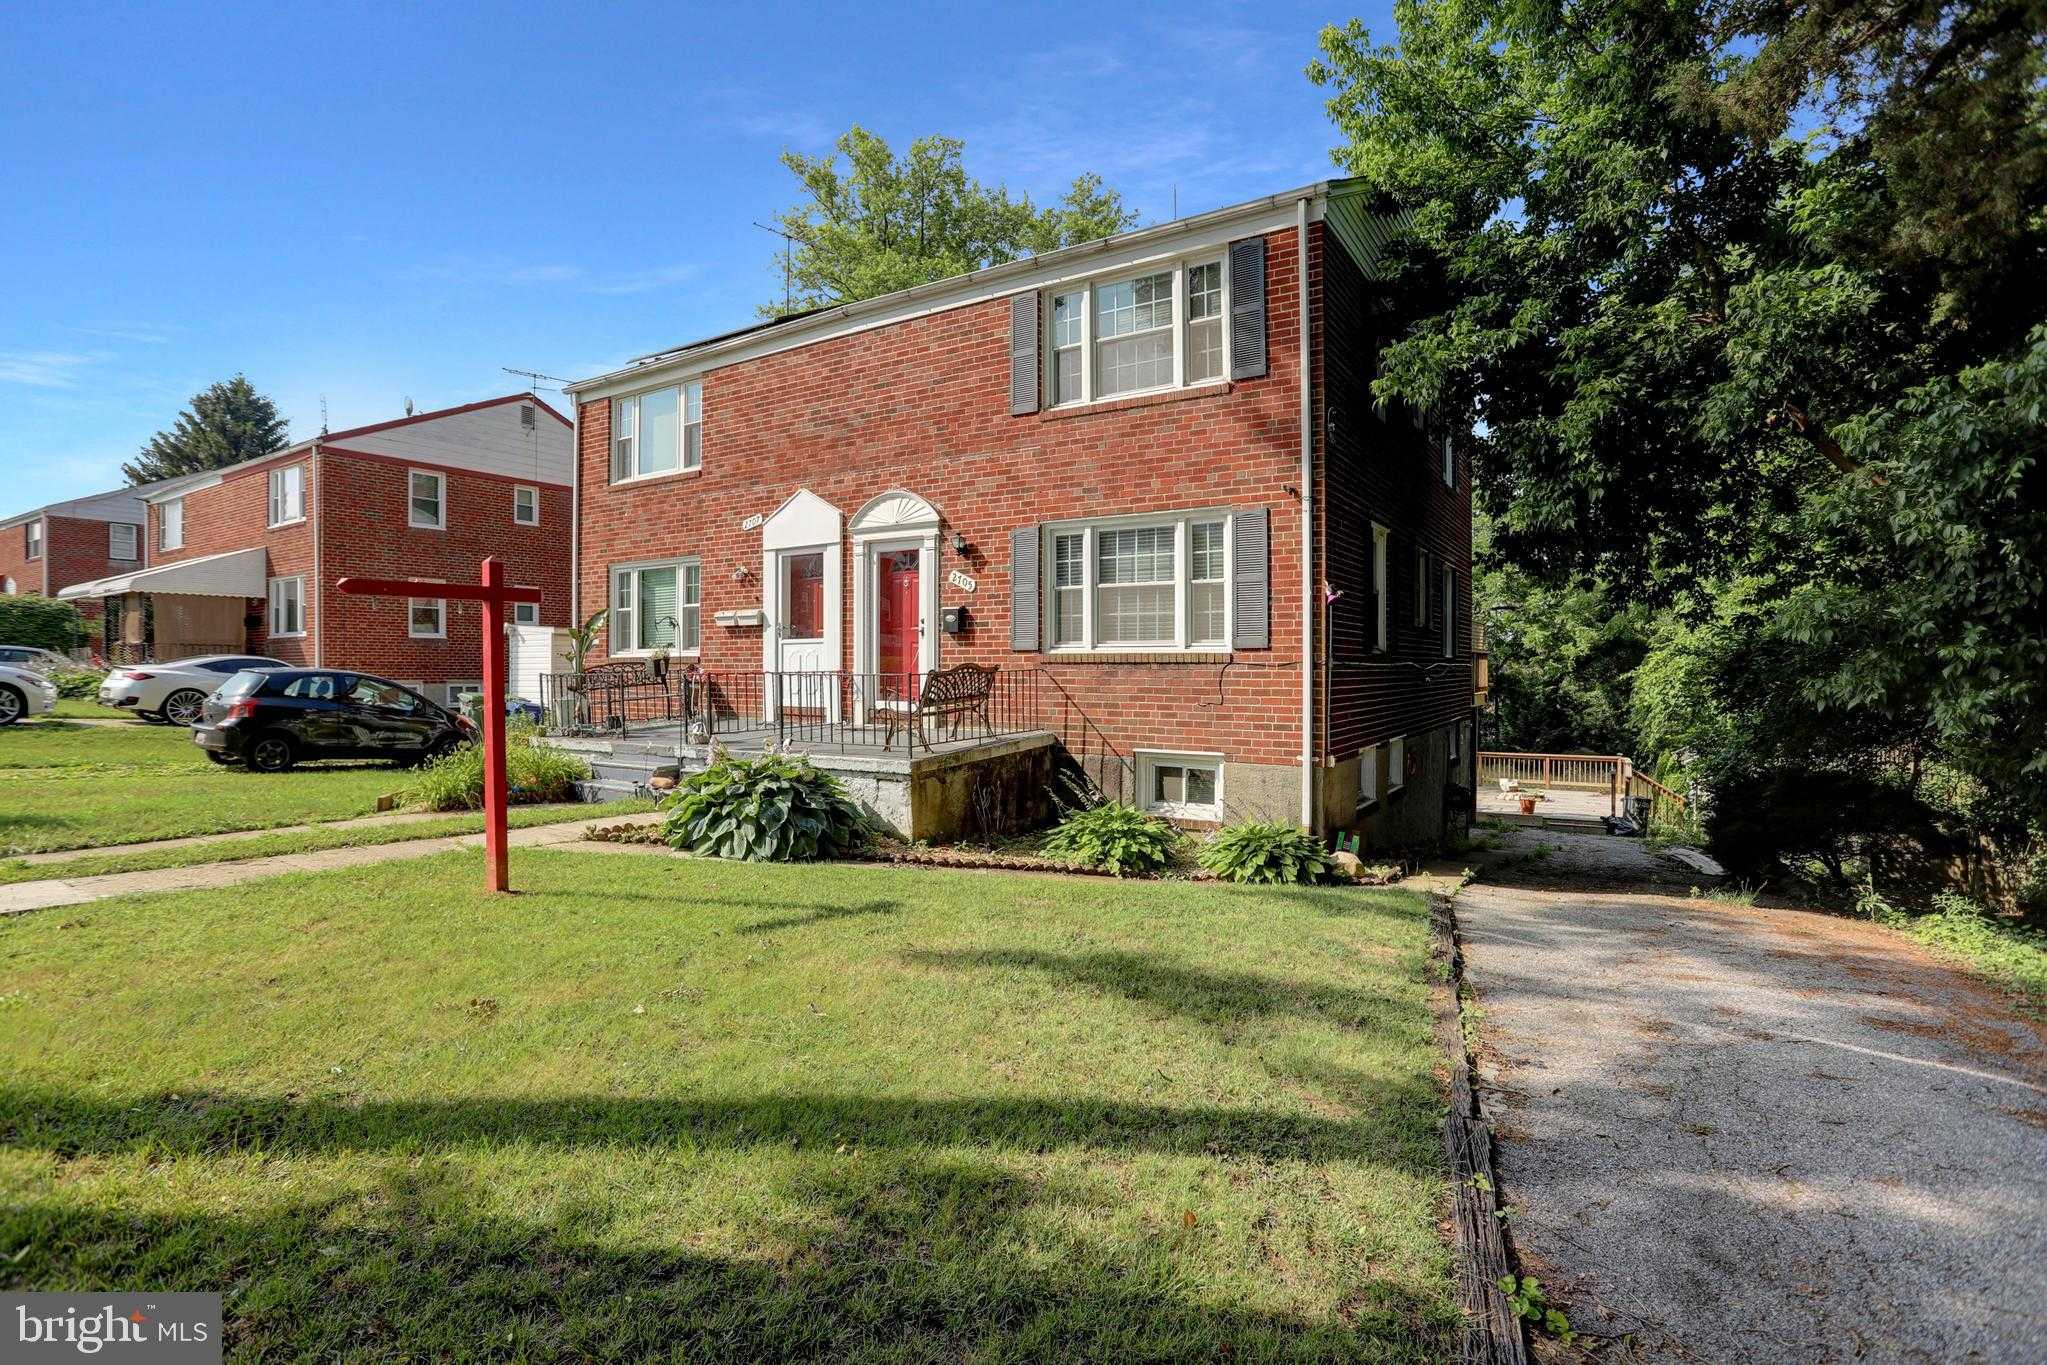 View BALTIMORE, MD 21214 townhome